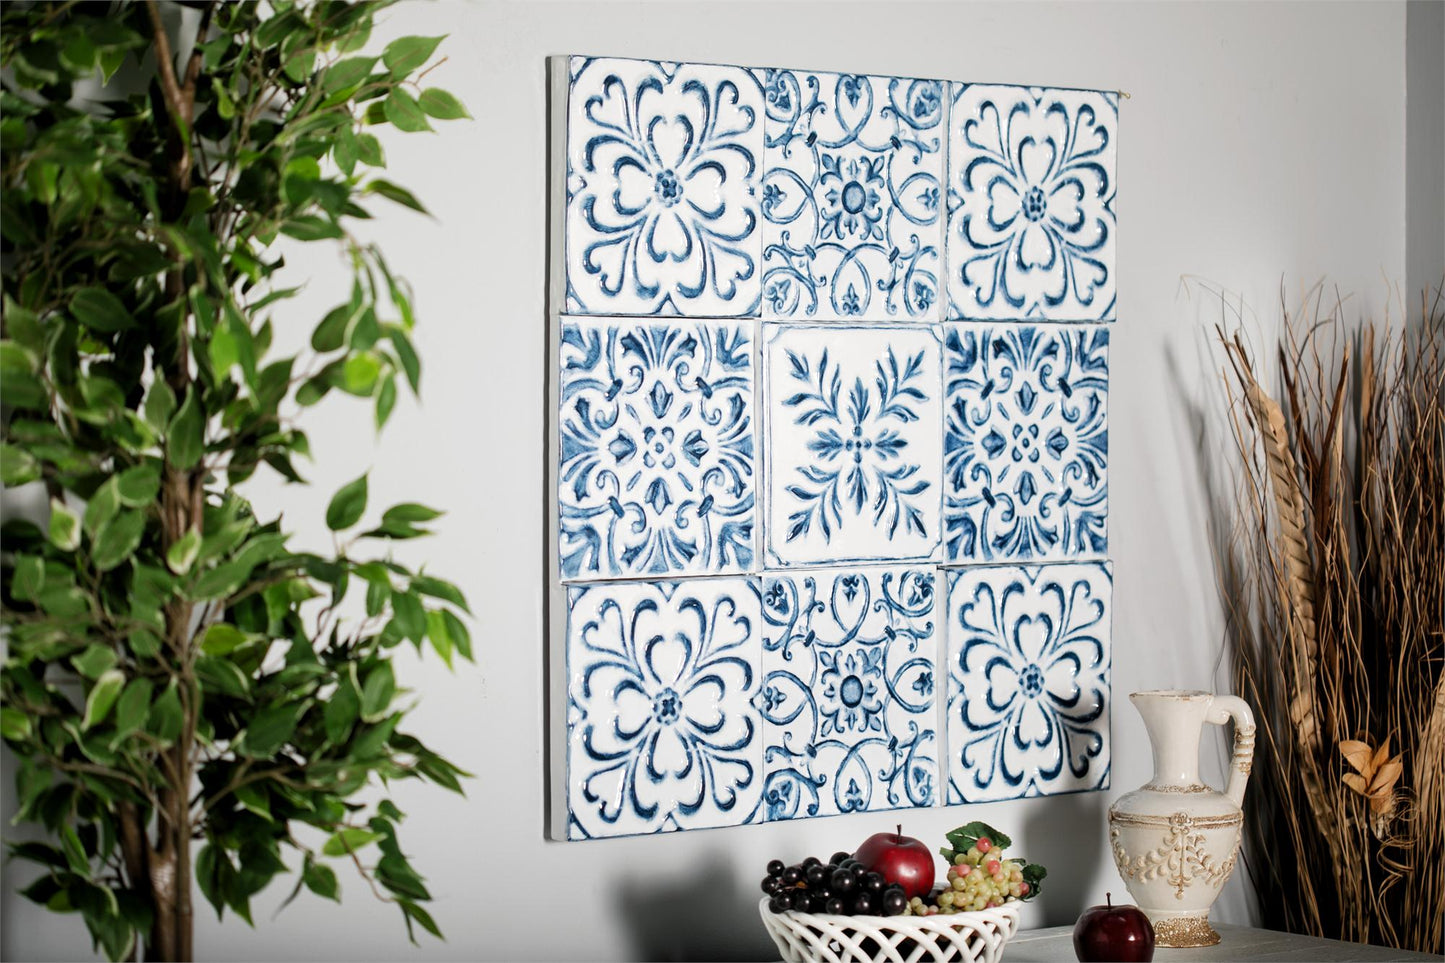 Metal Wall Art with Blue Floral Designs